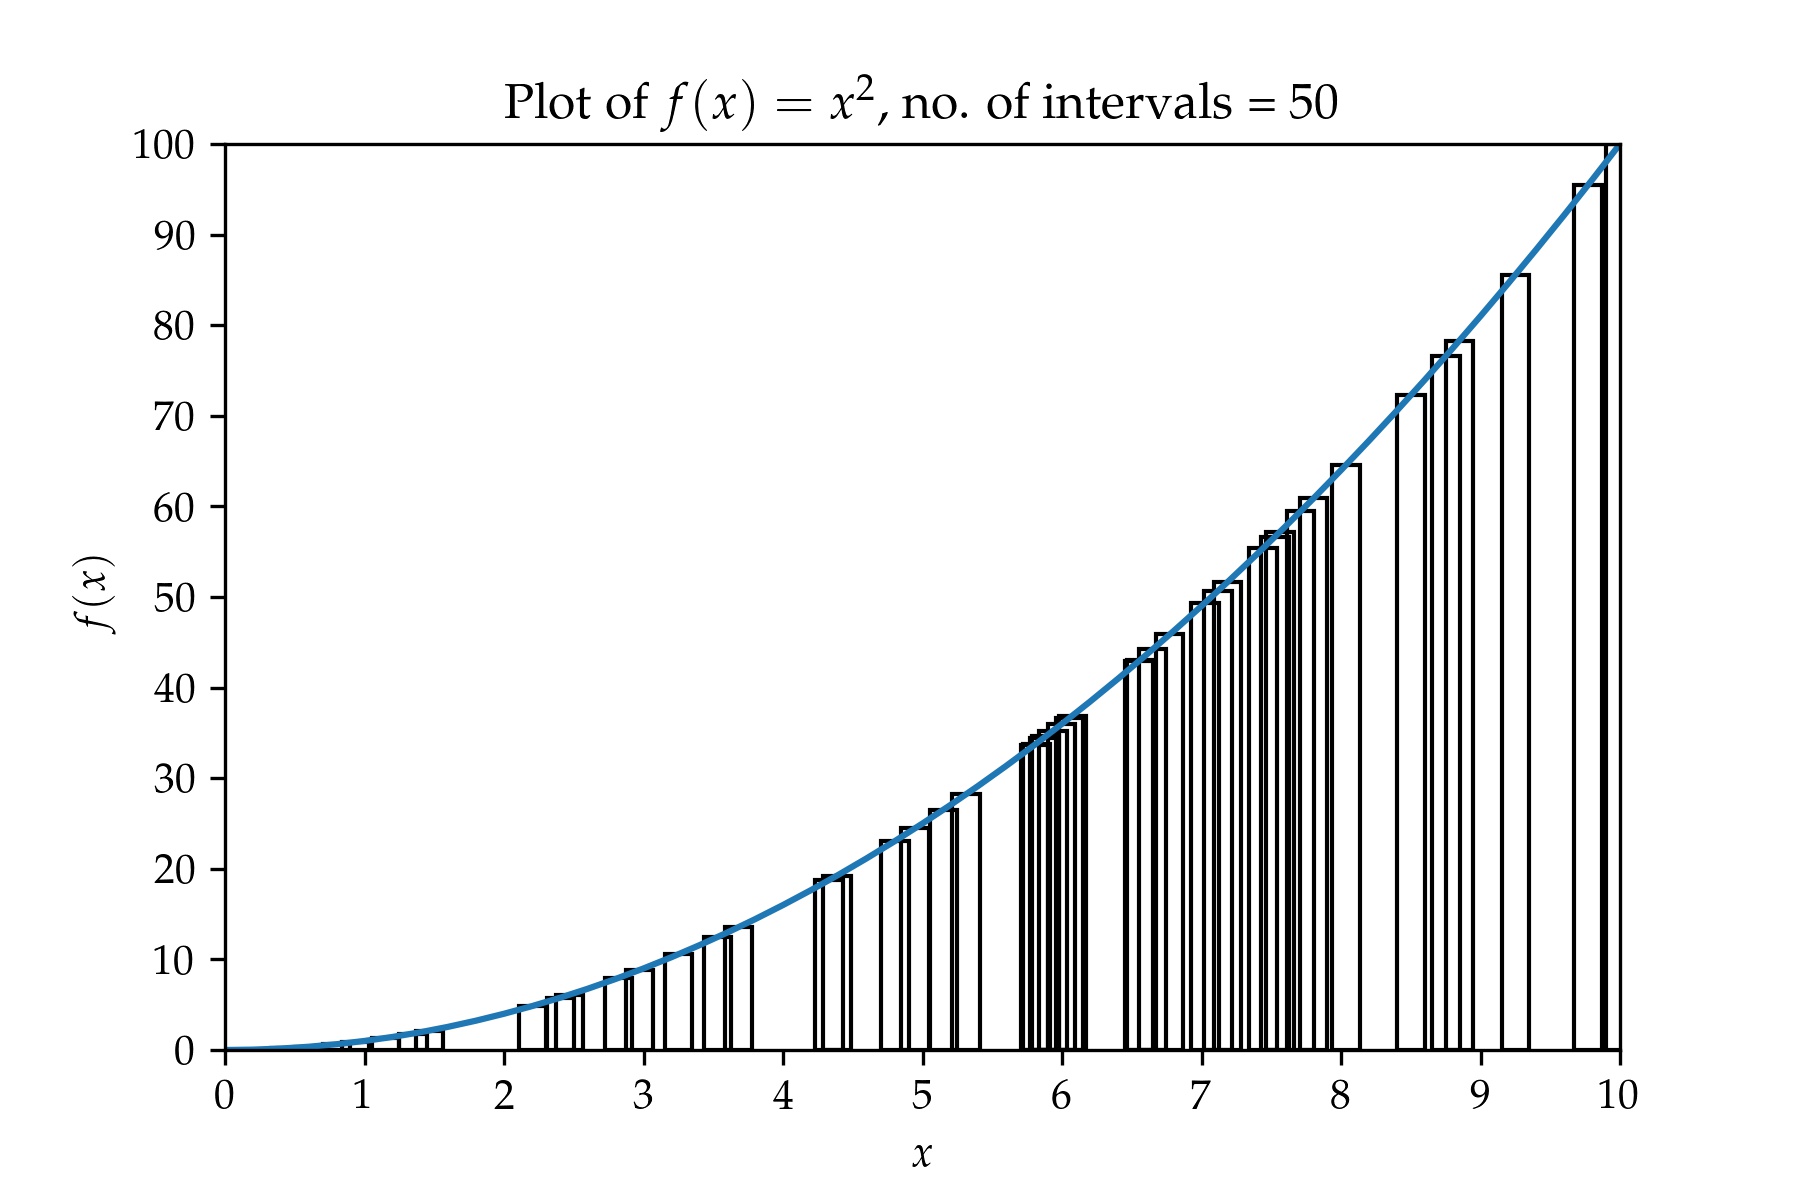 Plot of f(x) = x^2 with 50 samples